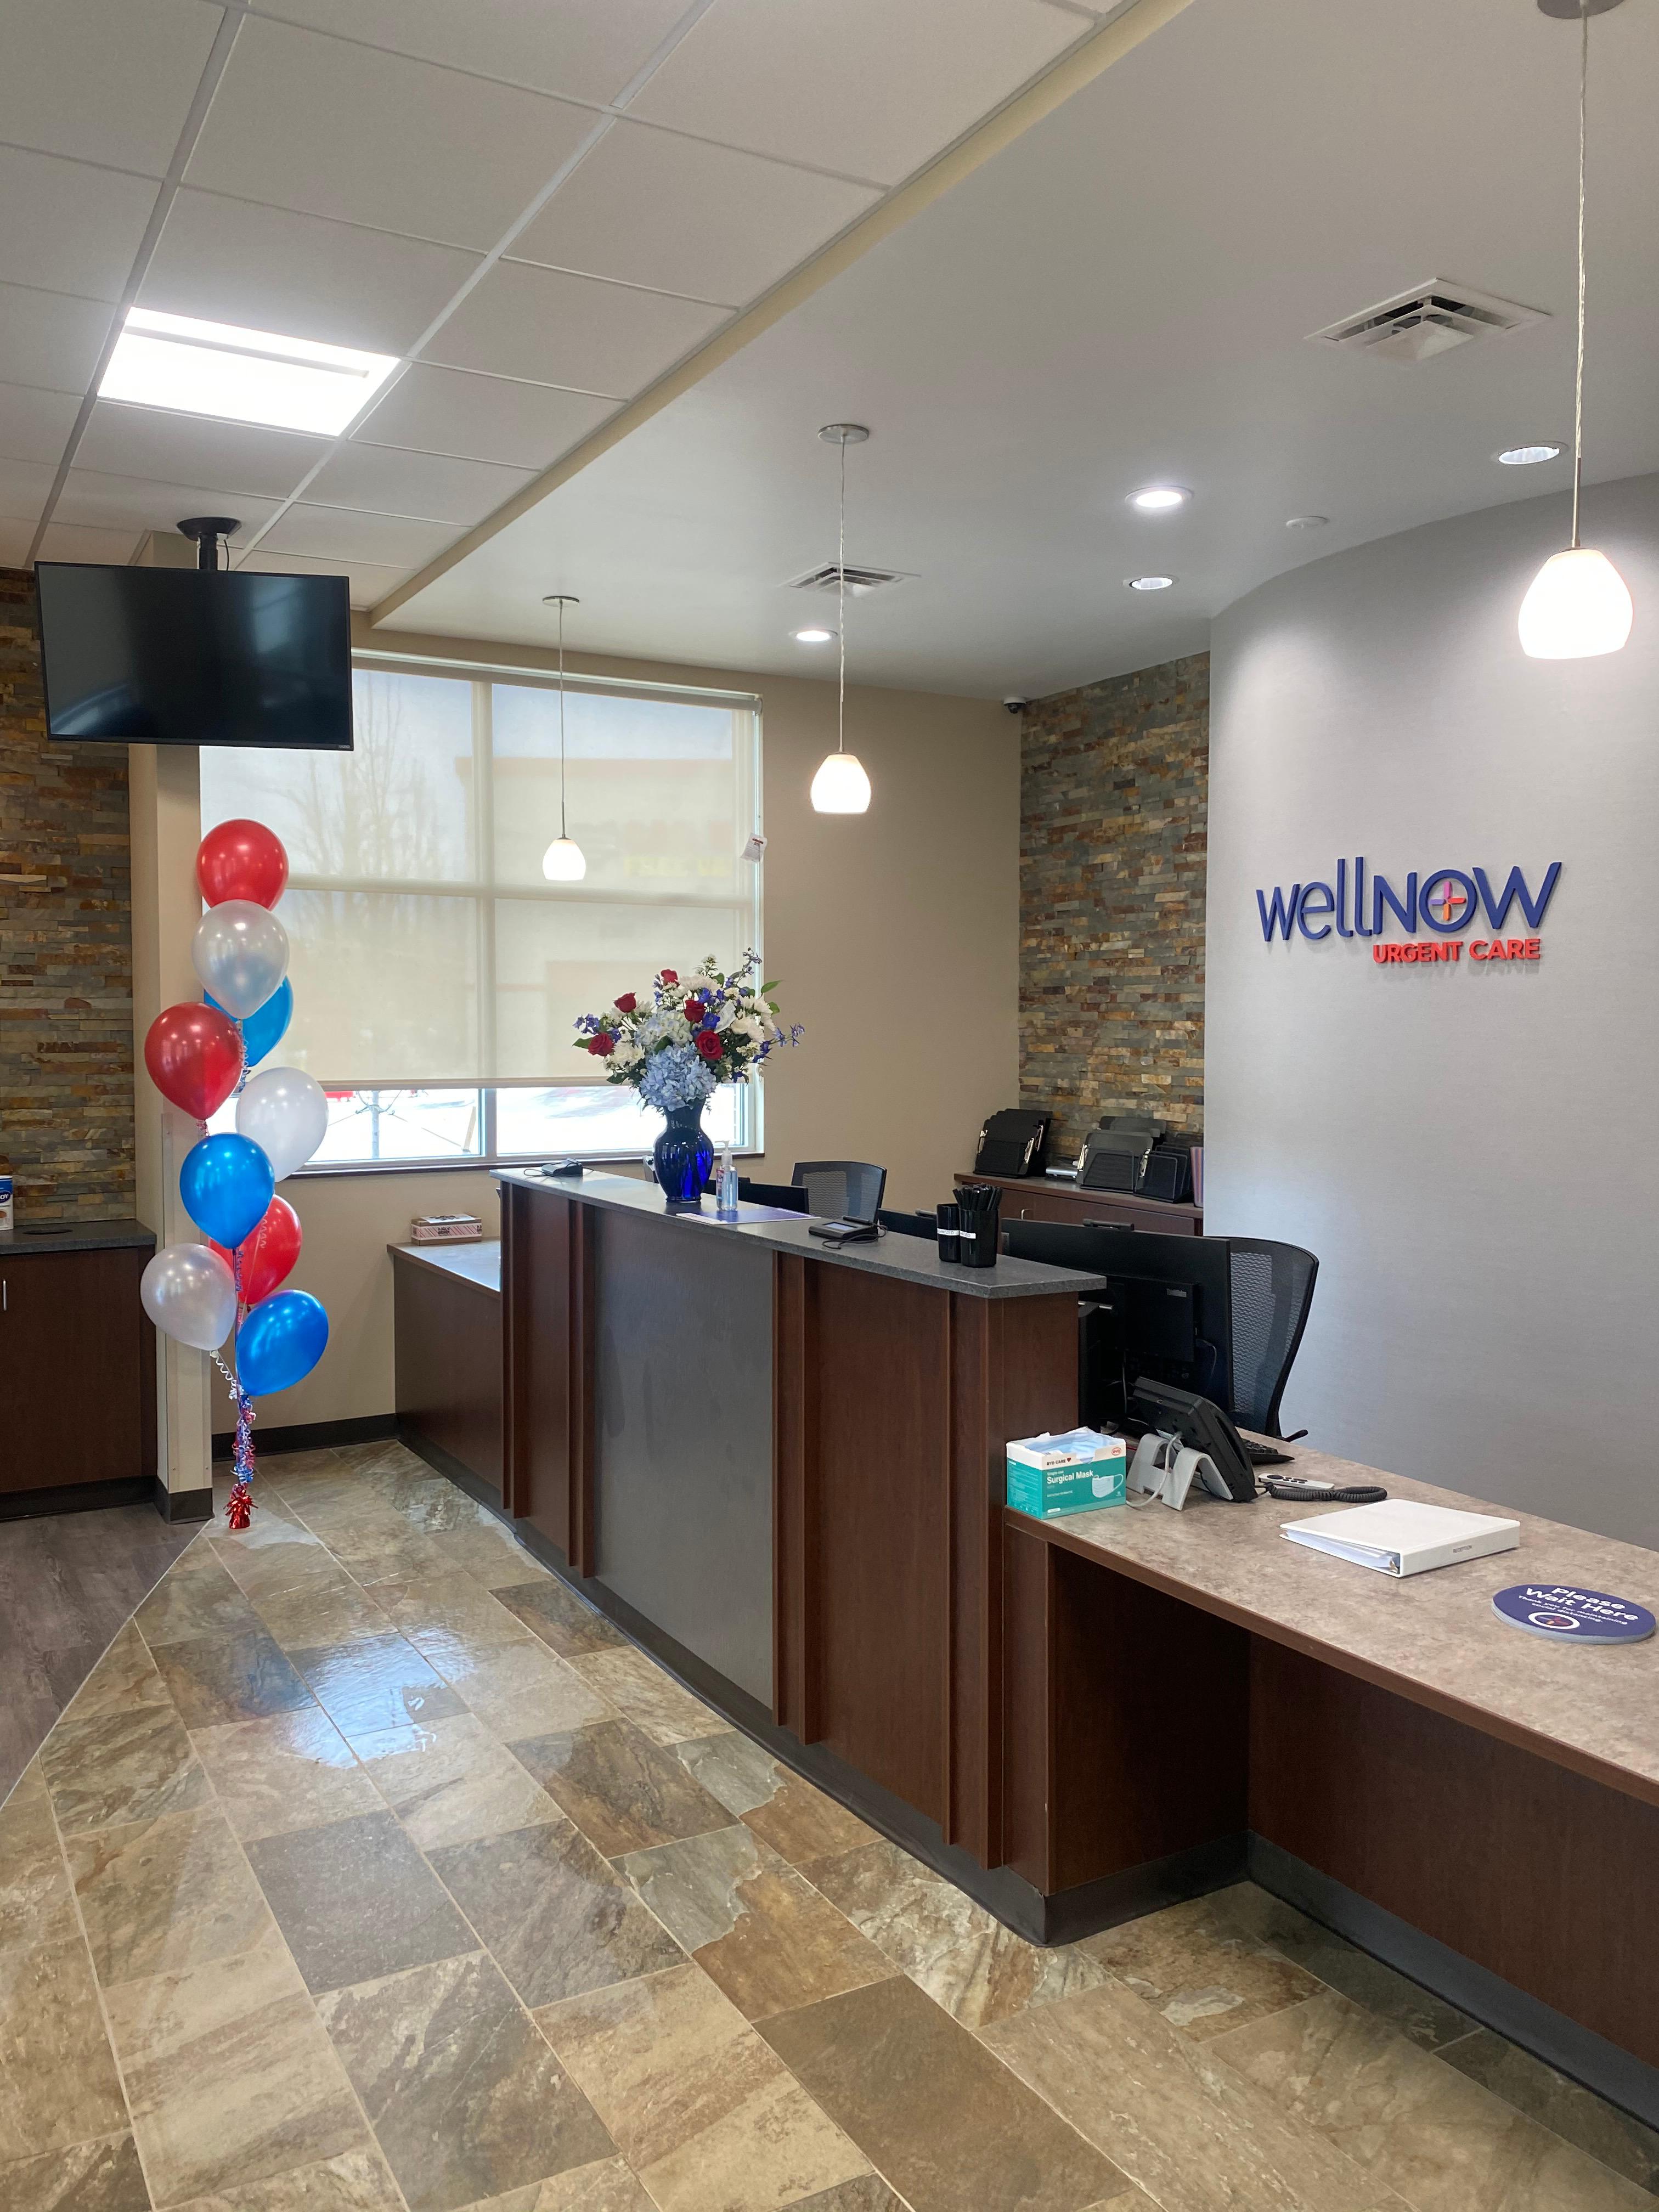 WellNow Urgent Care center provides immediate walk-in treatment for illnesses and injuries, wellness WellNow Urgent Care Clifton Park (518)930-7486